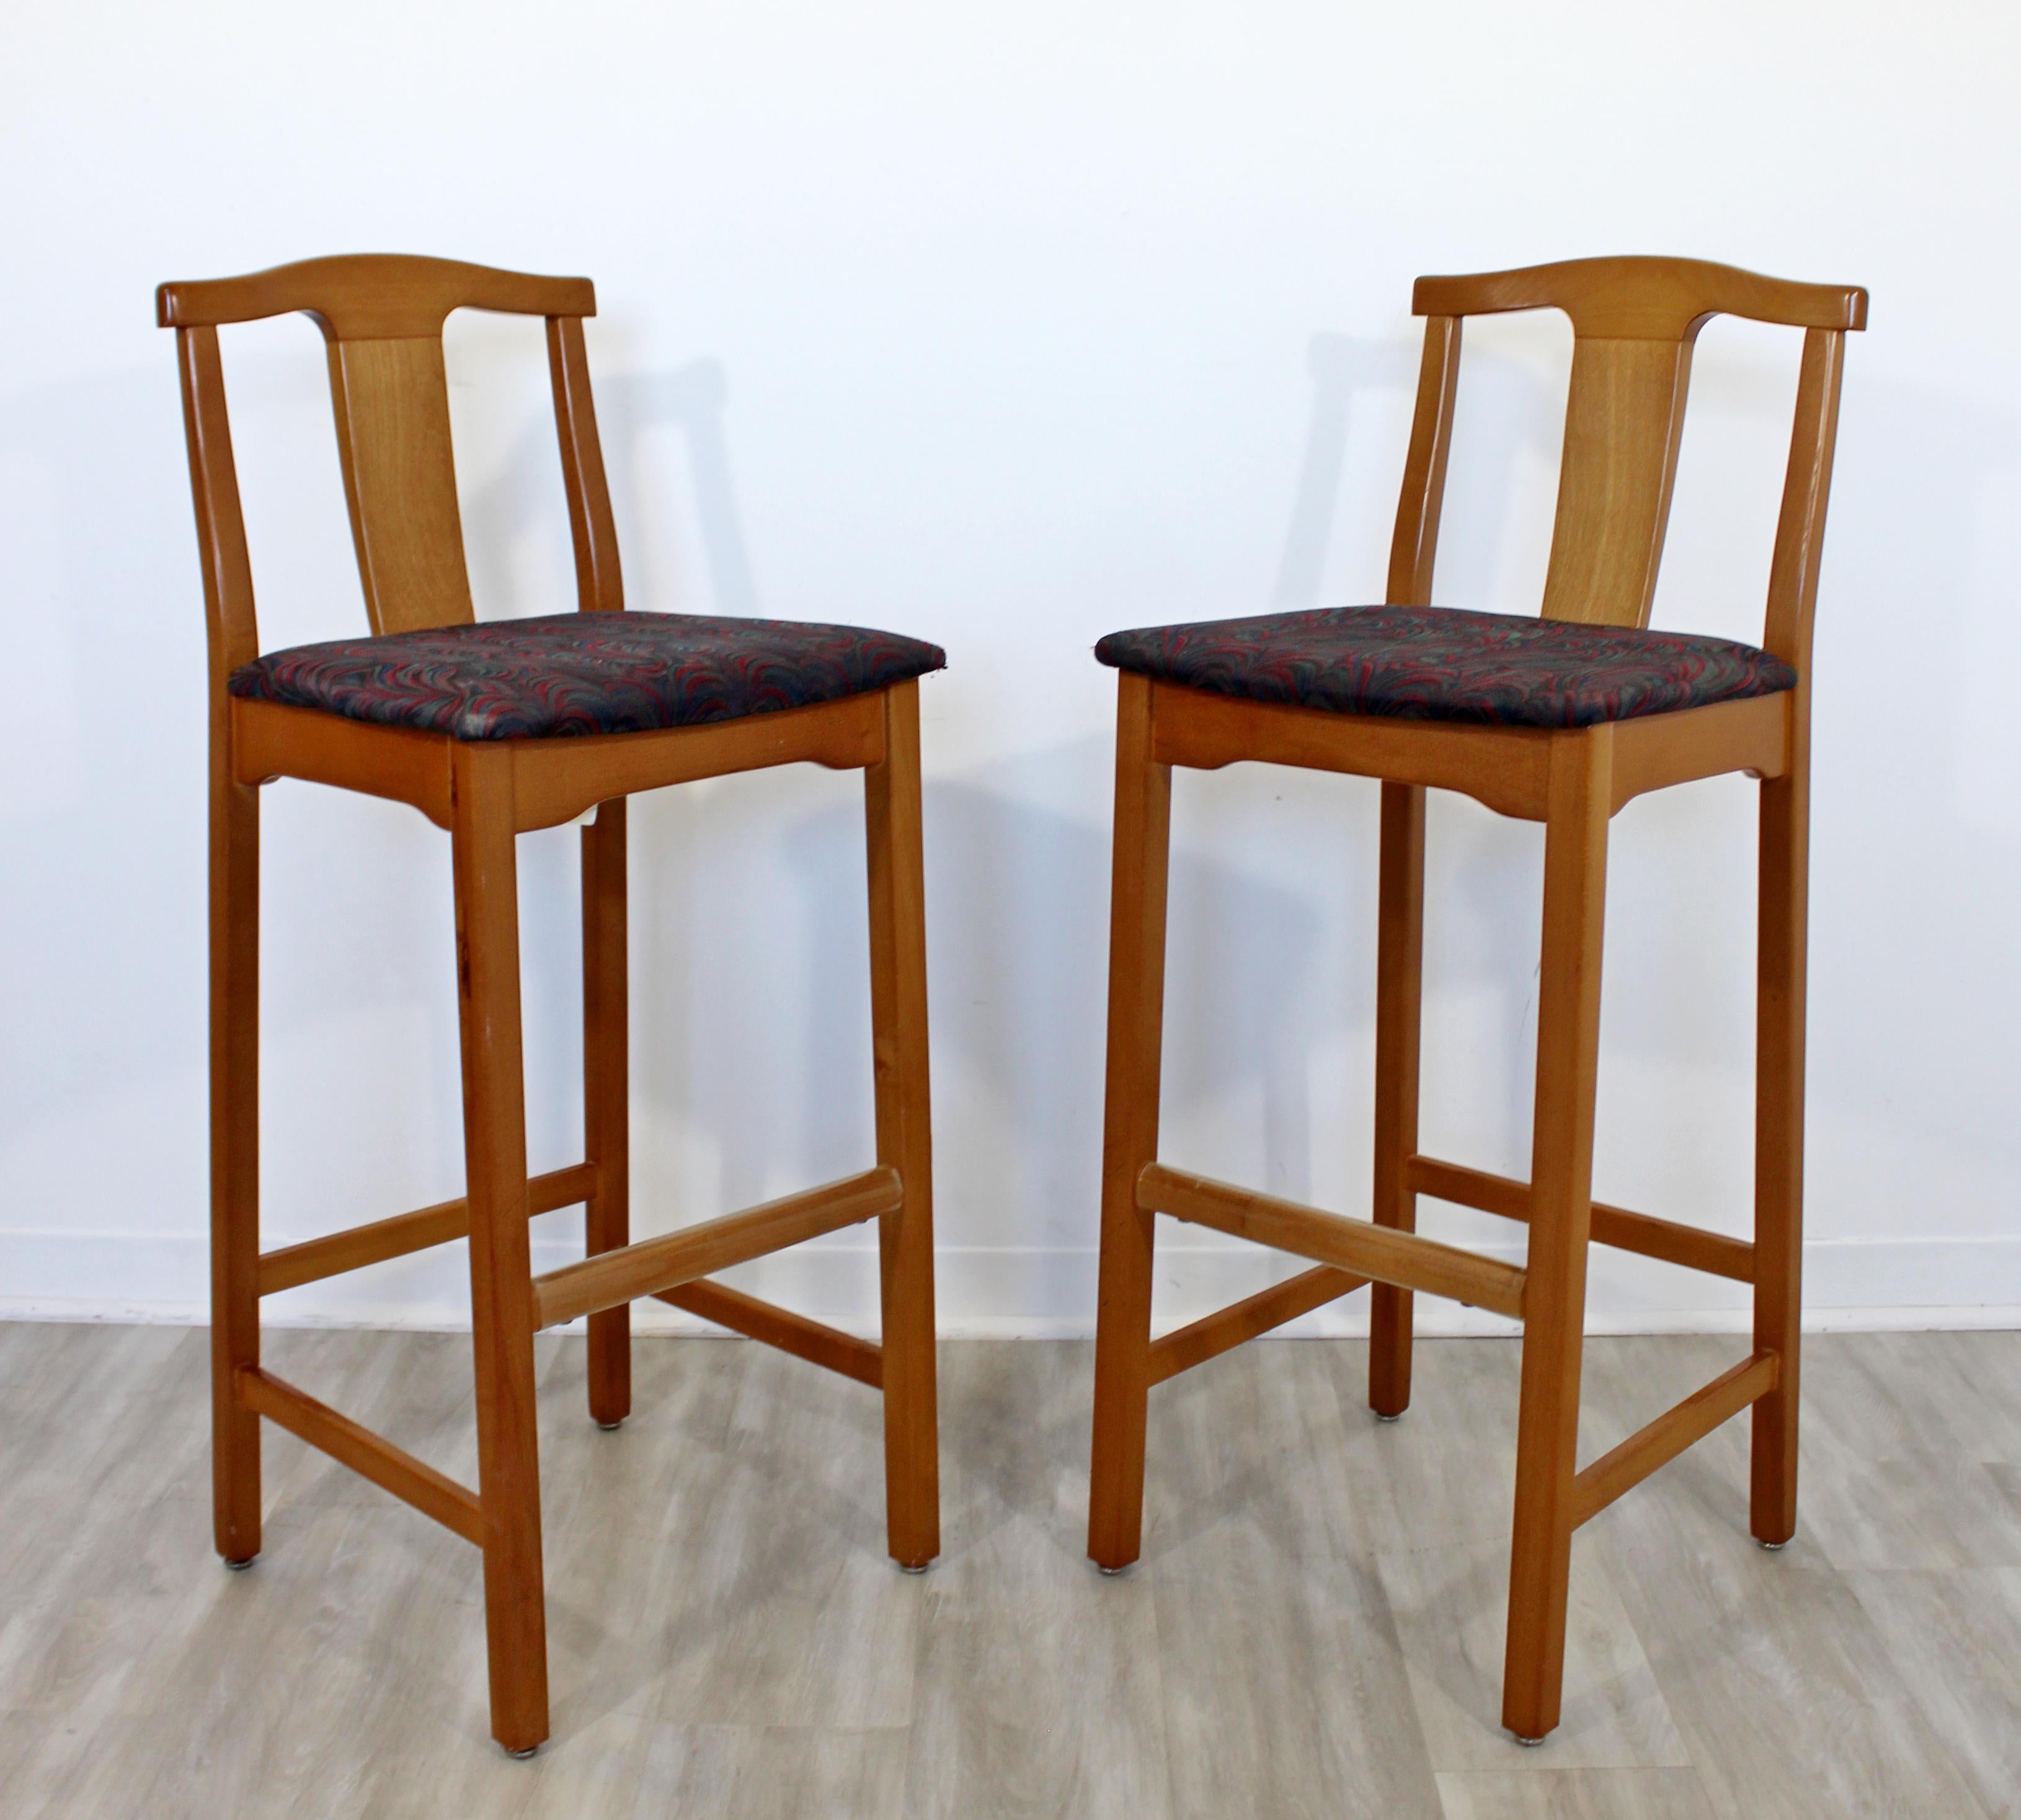 Contemporary Modernist Lowenstein Set of 4 Counter Bar Stools, 1990s In Good Condition For Sale In Keego Harbor, MI